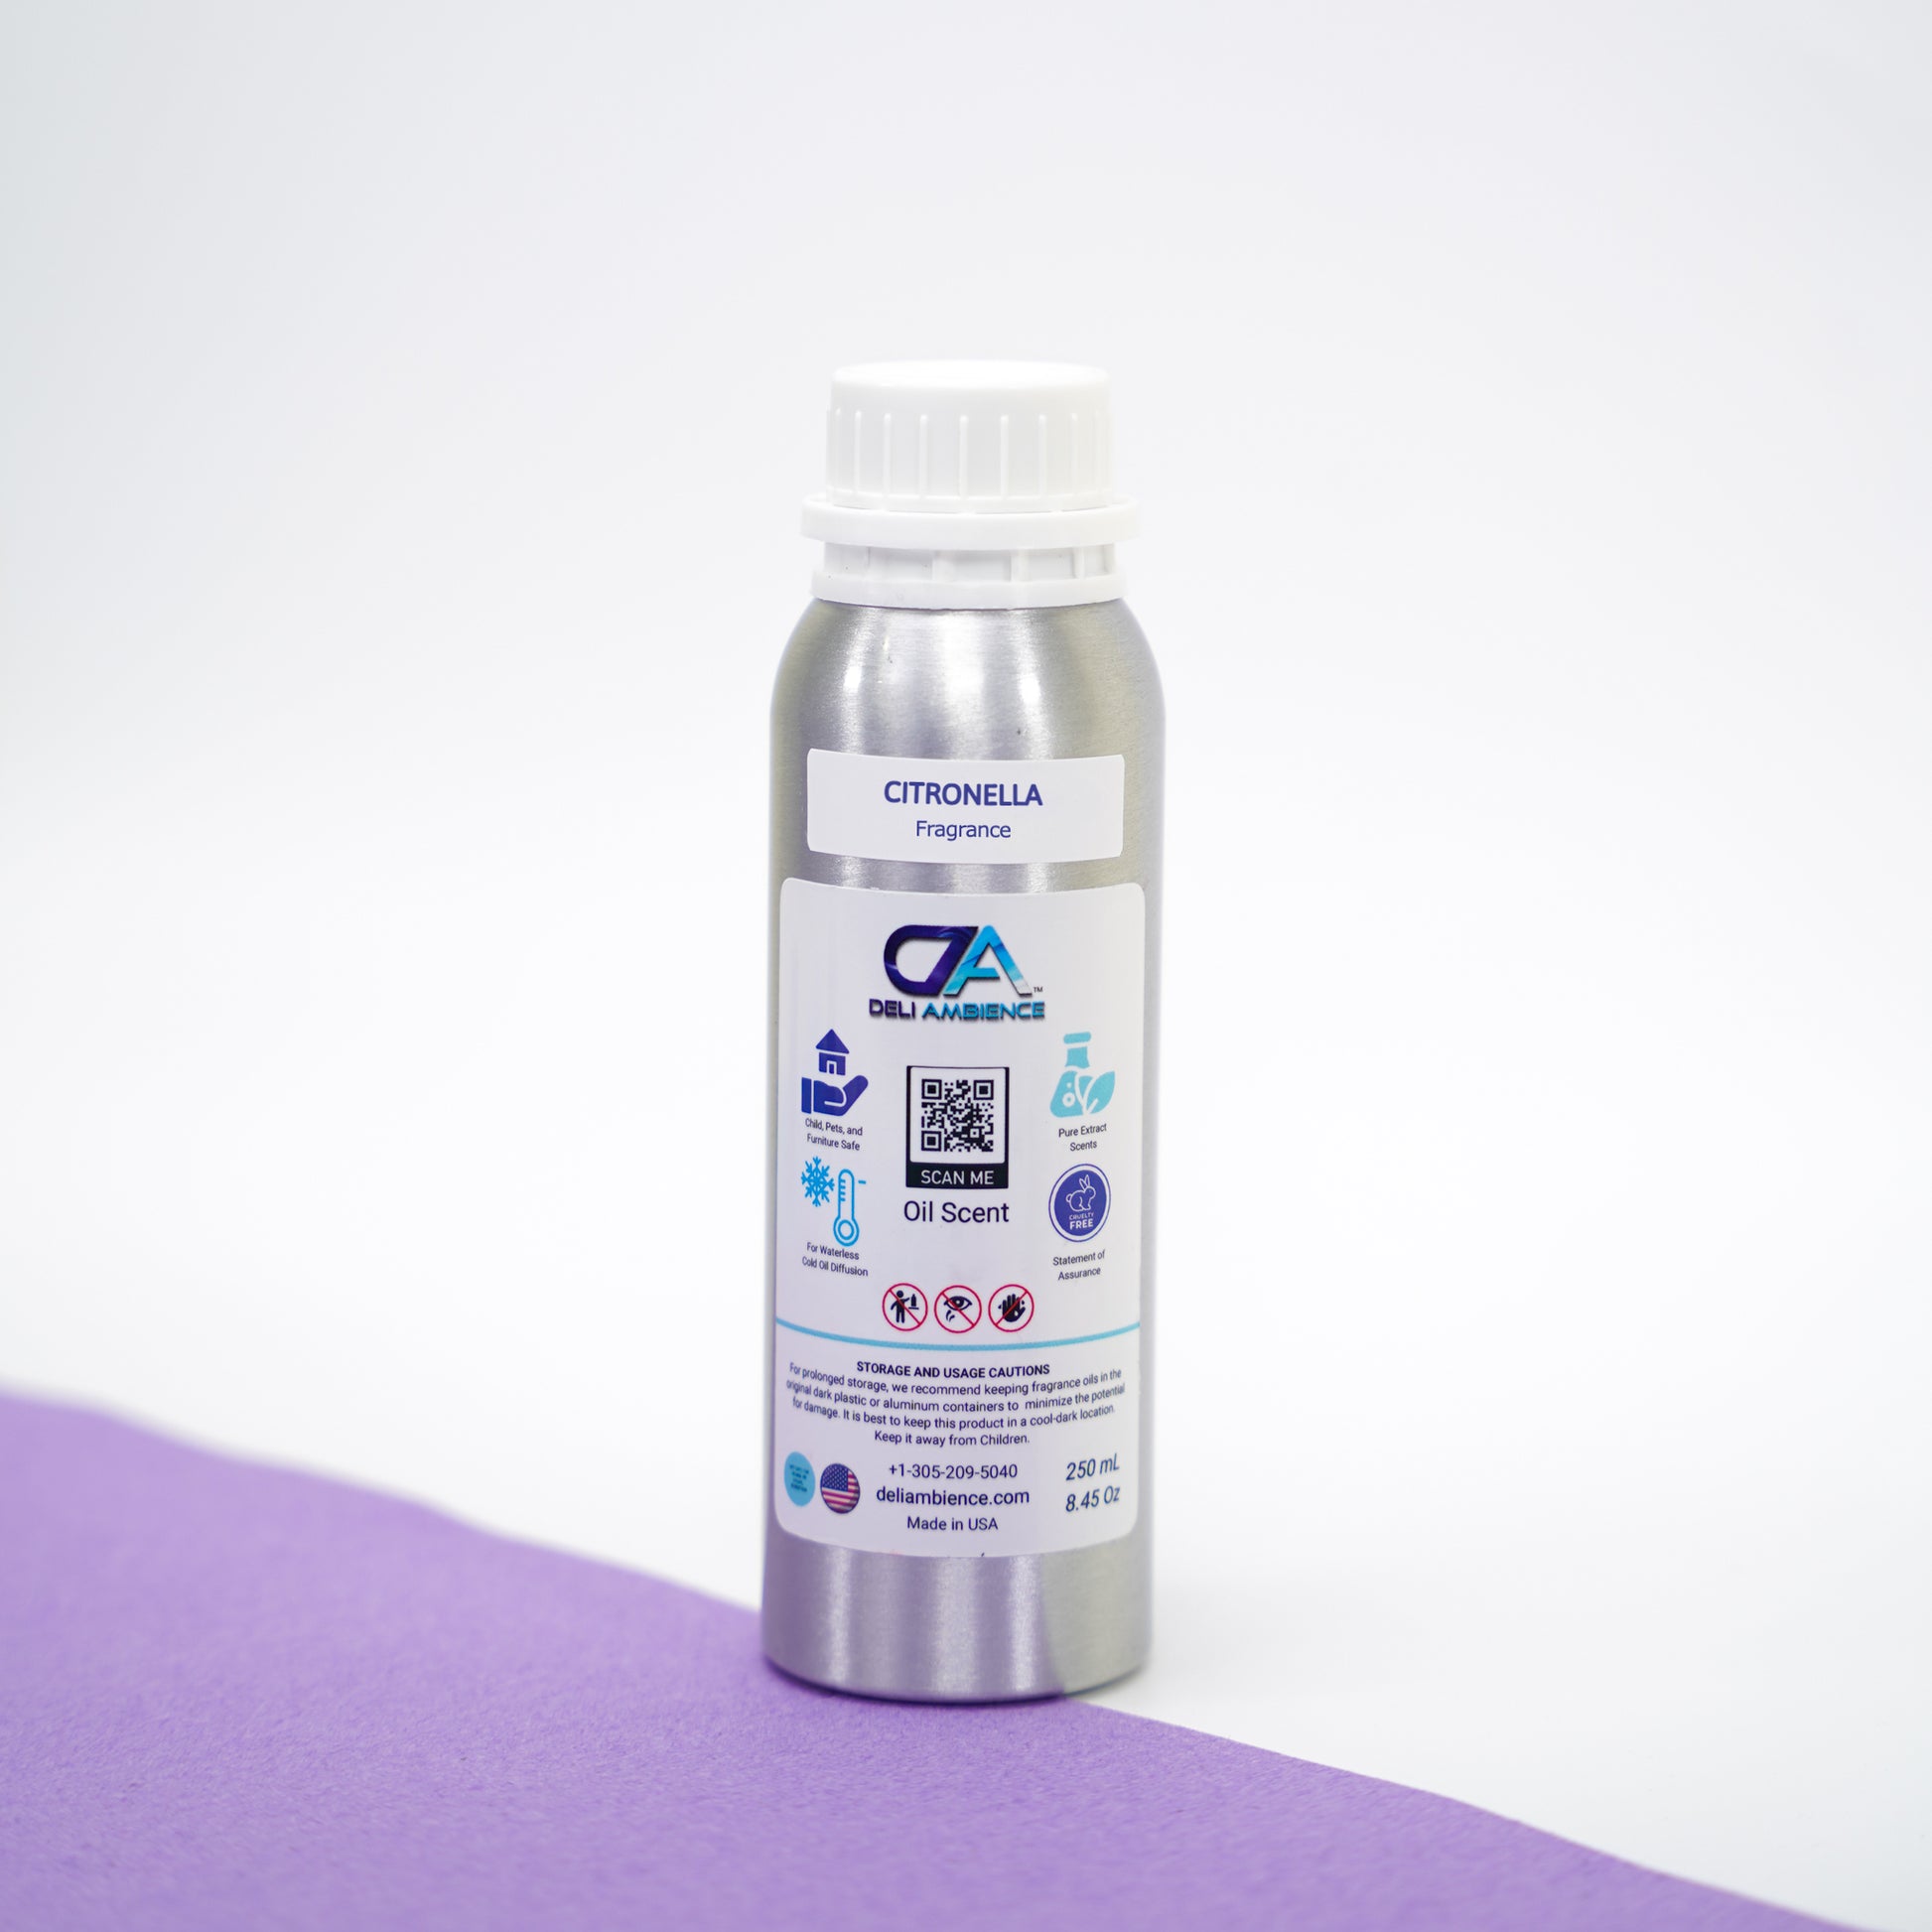 A bottle of Fresh Citronella Oil Scent with a pleasing aroma on a purple surface.